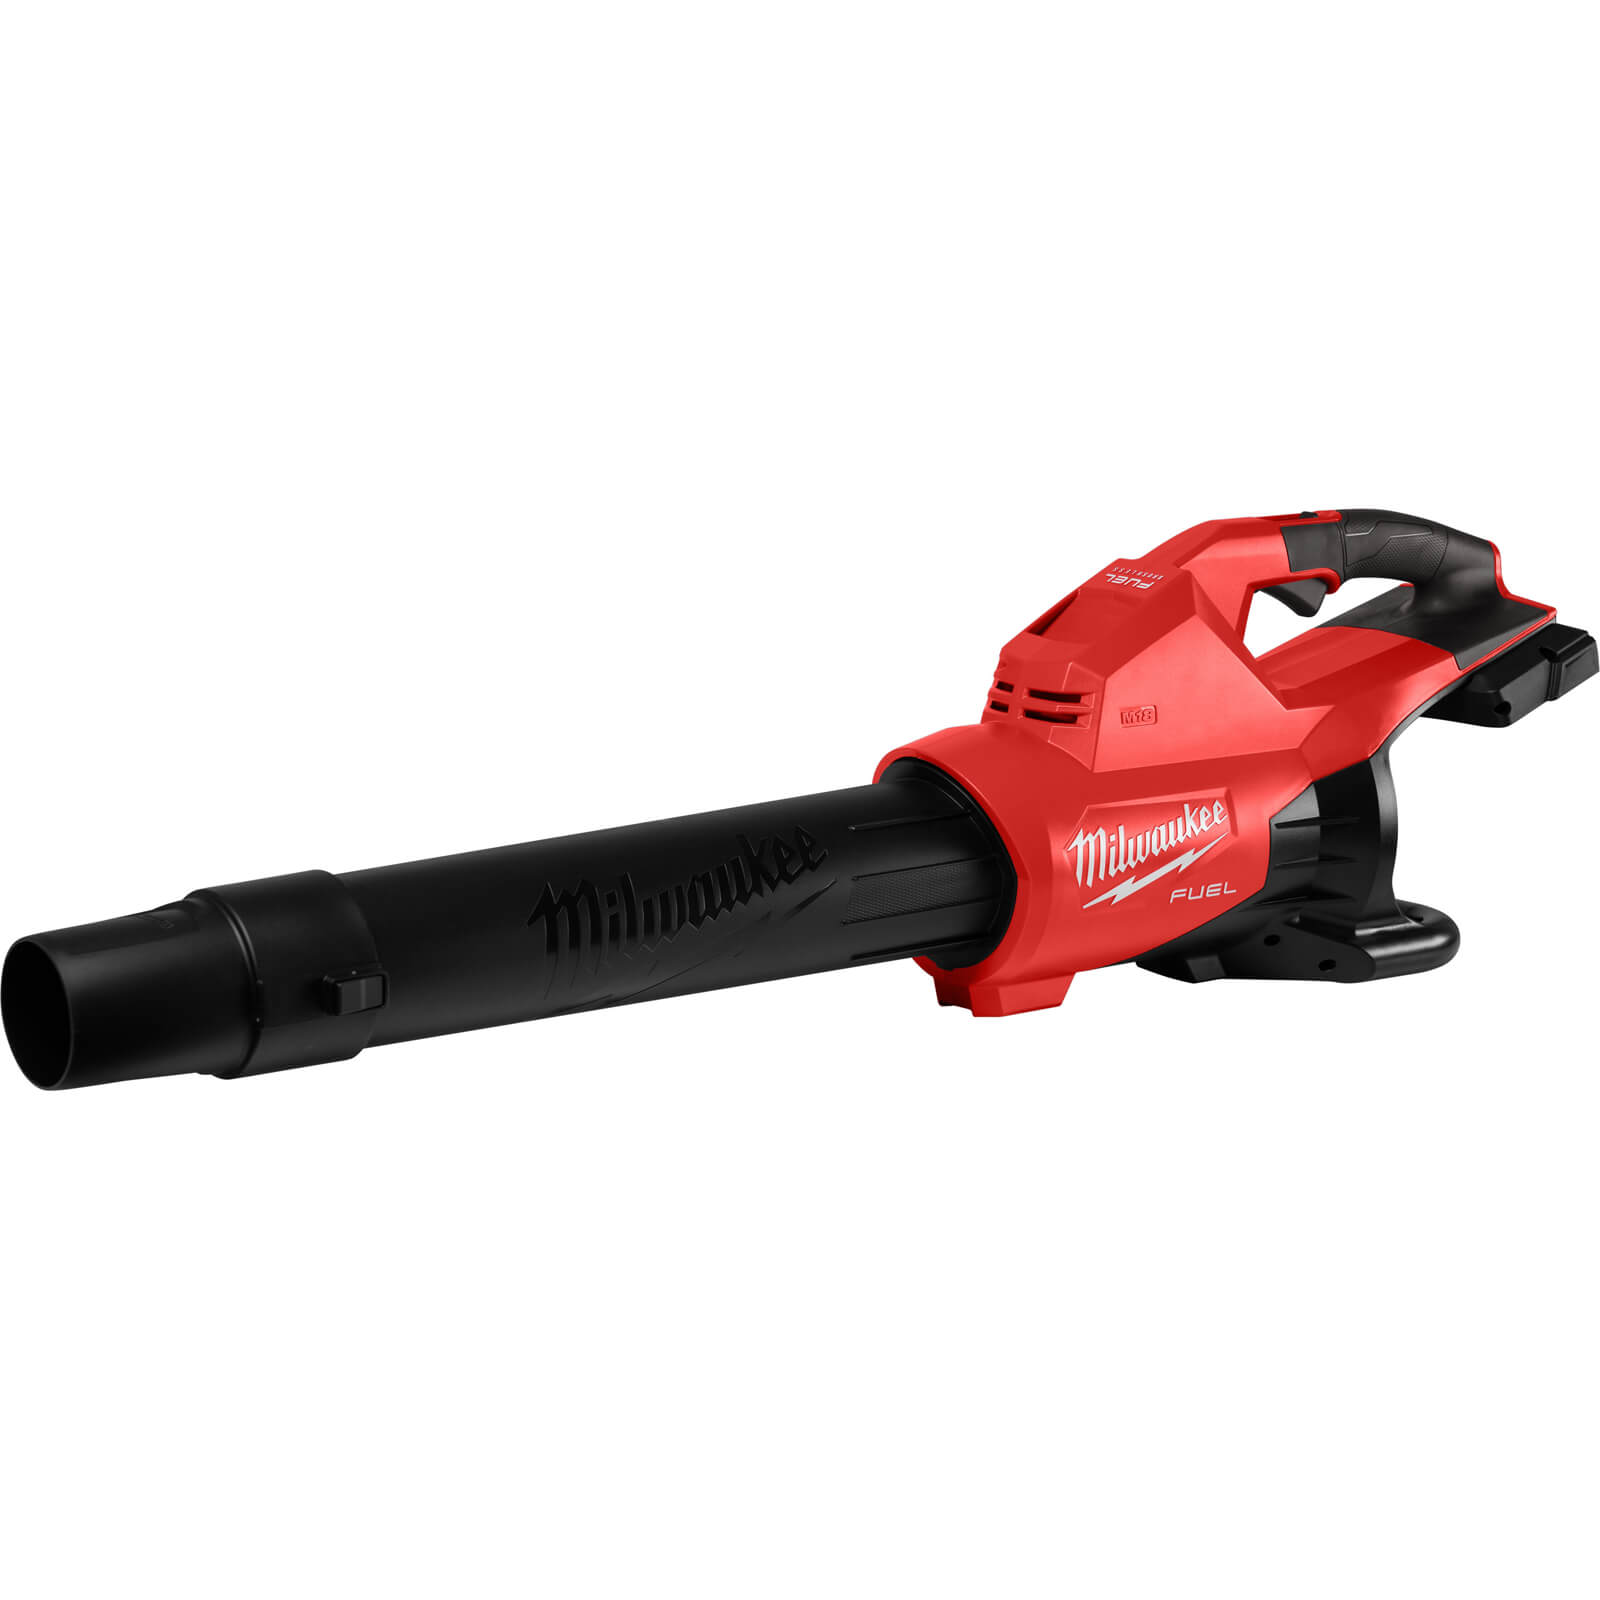 Image of Milwaukee M18 F2BL Fuel Twin 18v Cordless Brushless Garden Leaf Blower No Batteries No Charger